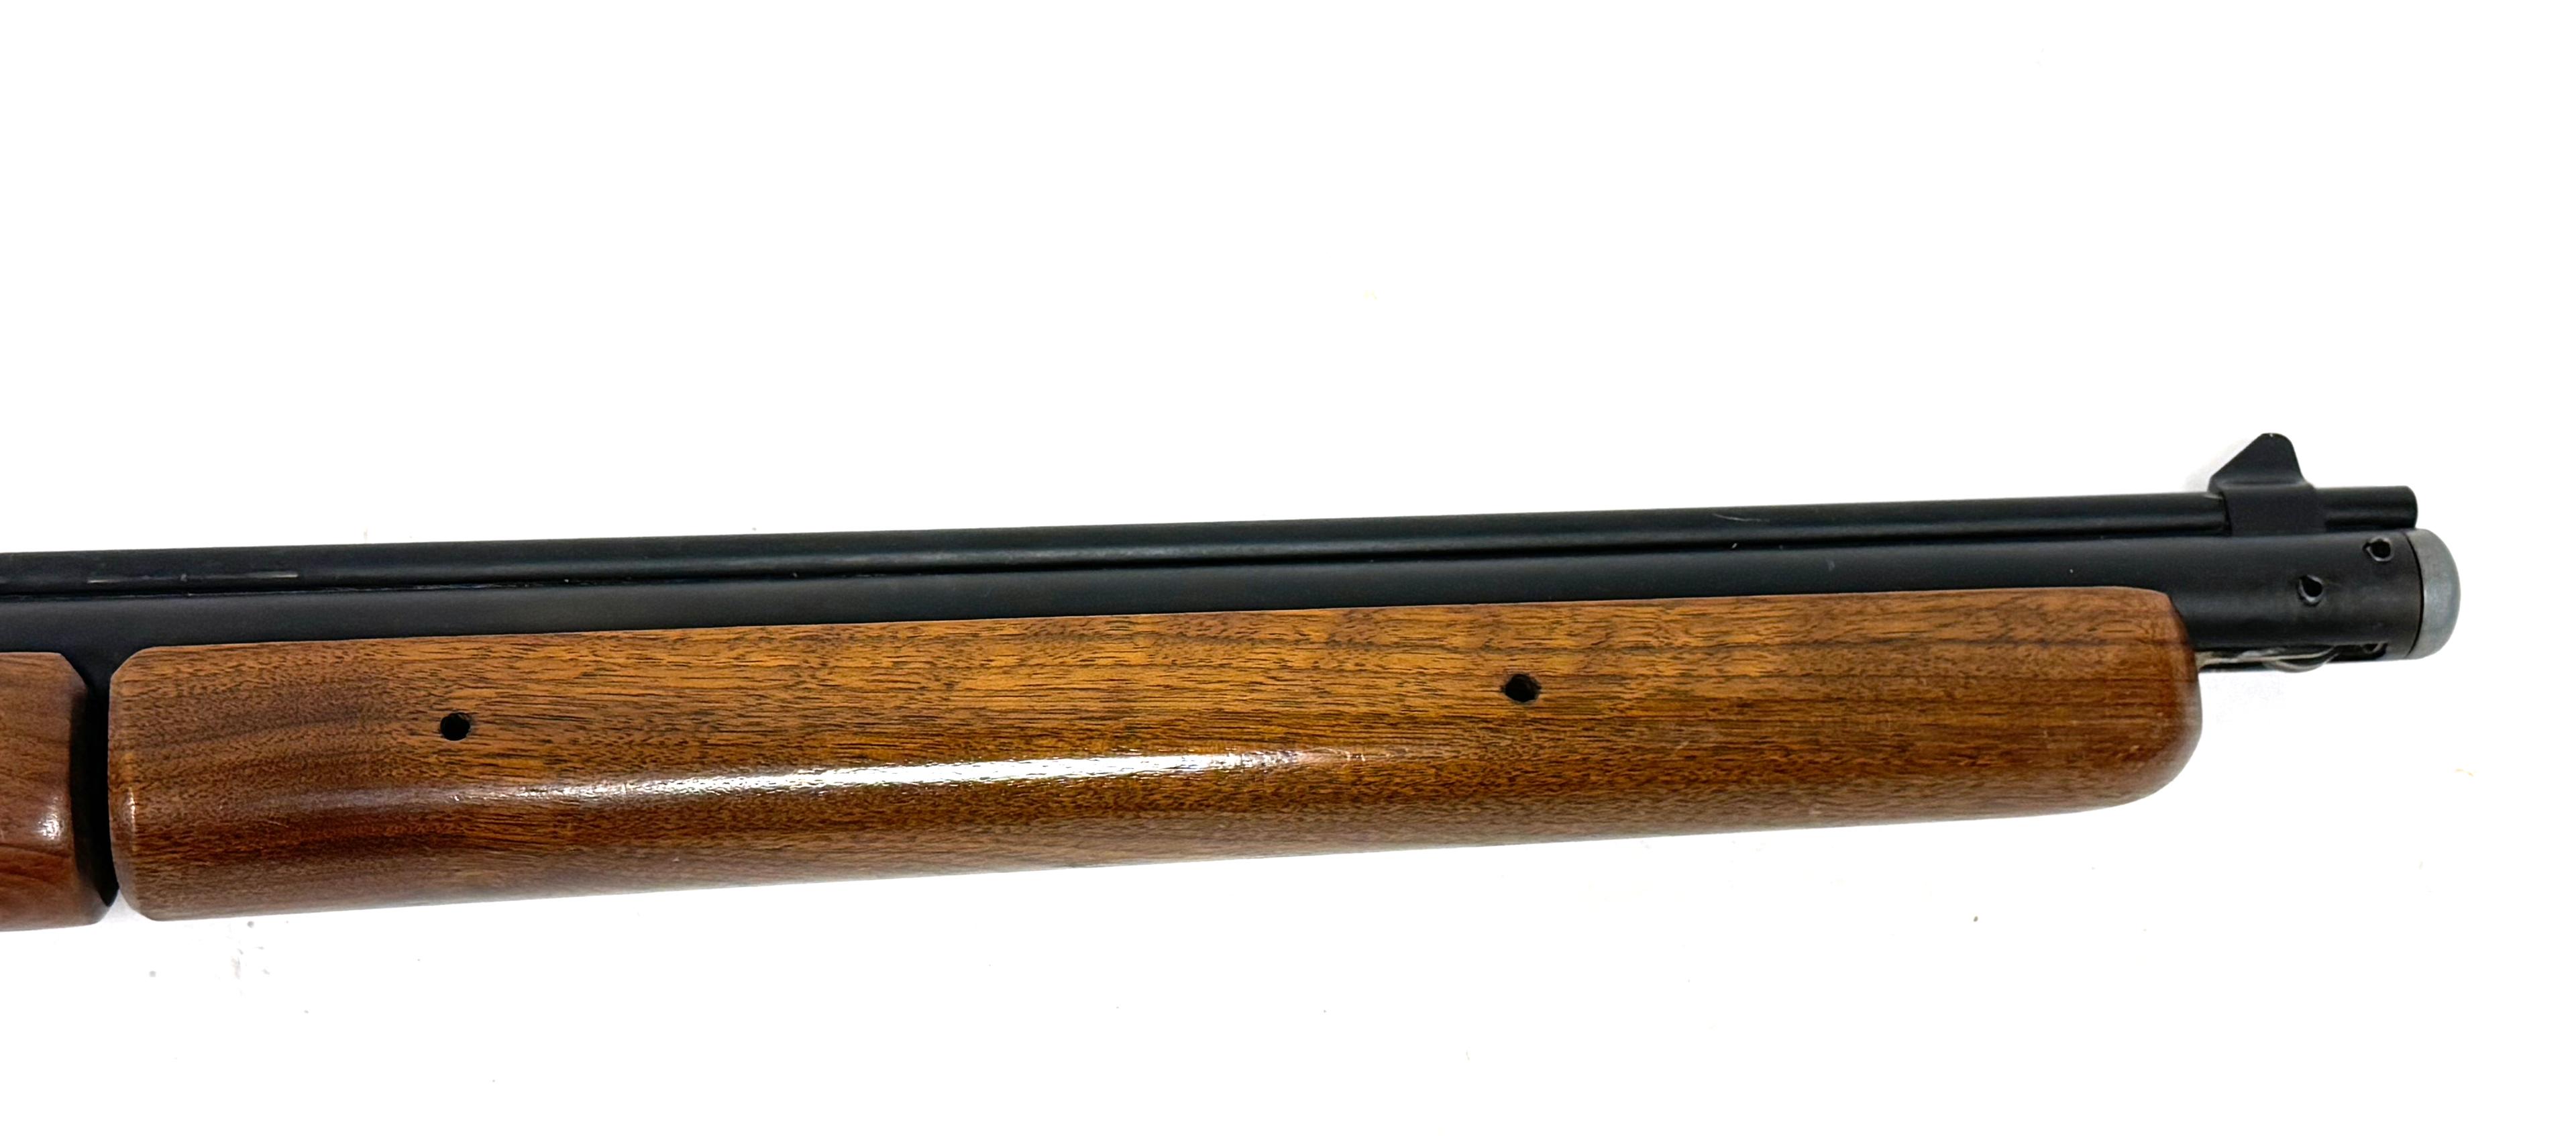 Sheridan Products C Series 5mm Pump Action Pellet Rifle